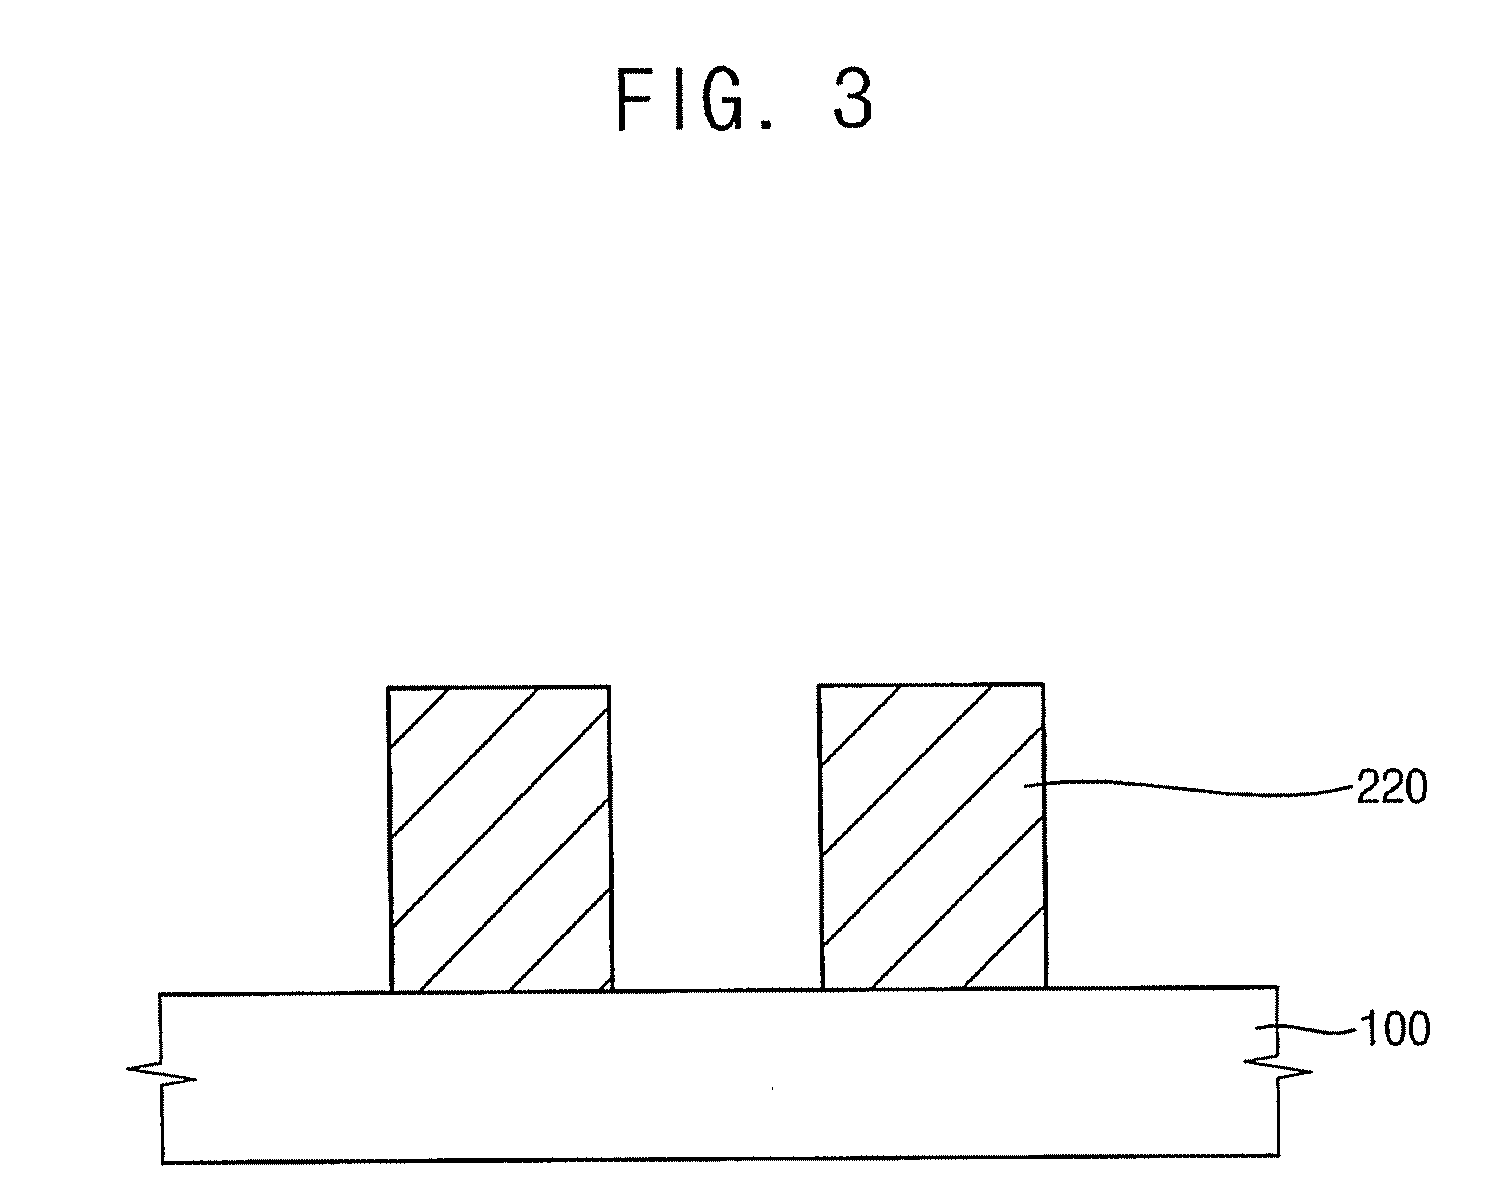 Photoresist composition and method of forming a photoresist pattern using the same